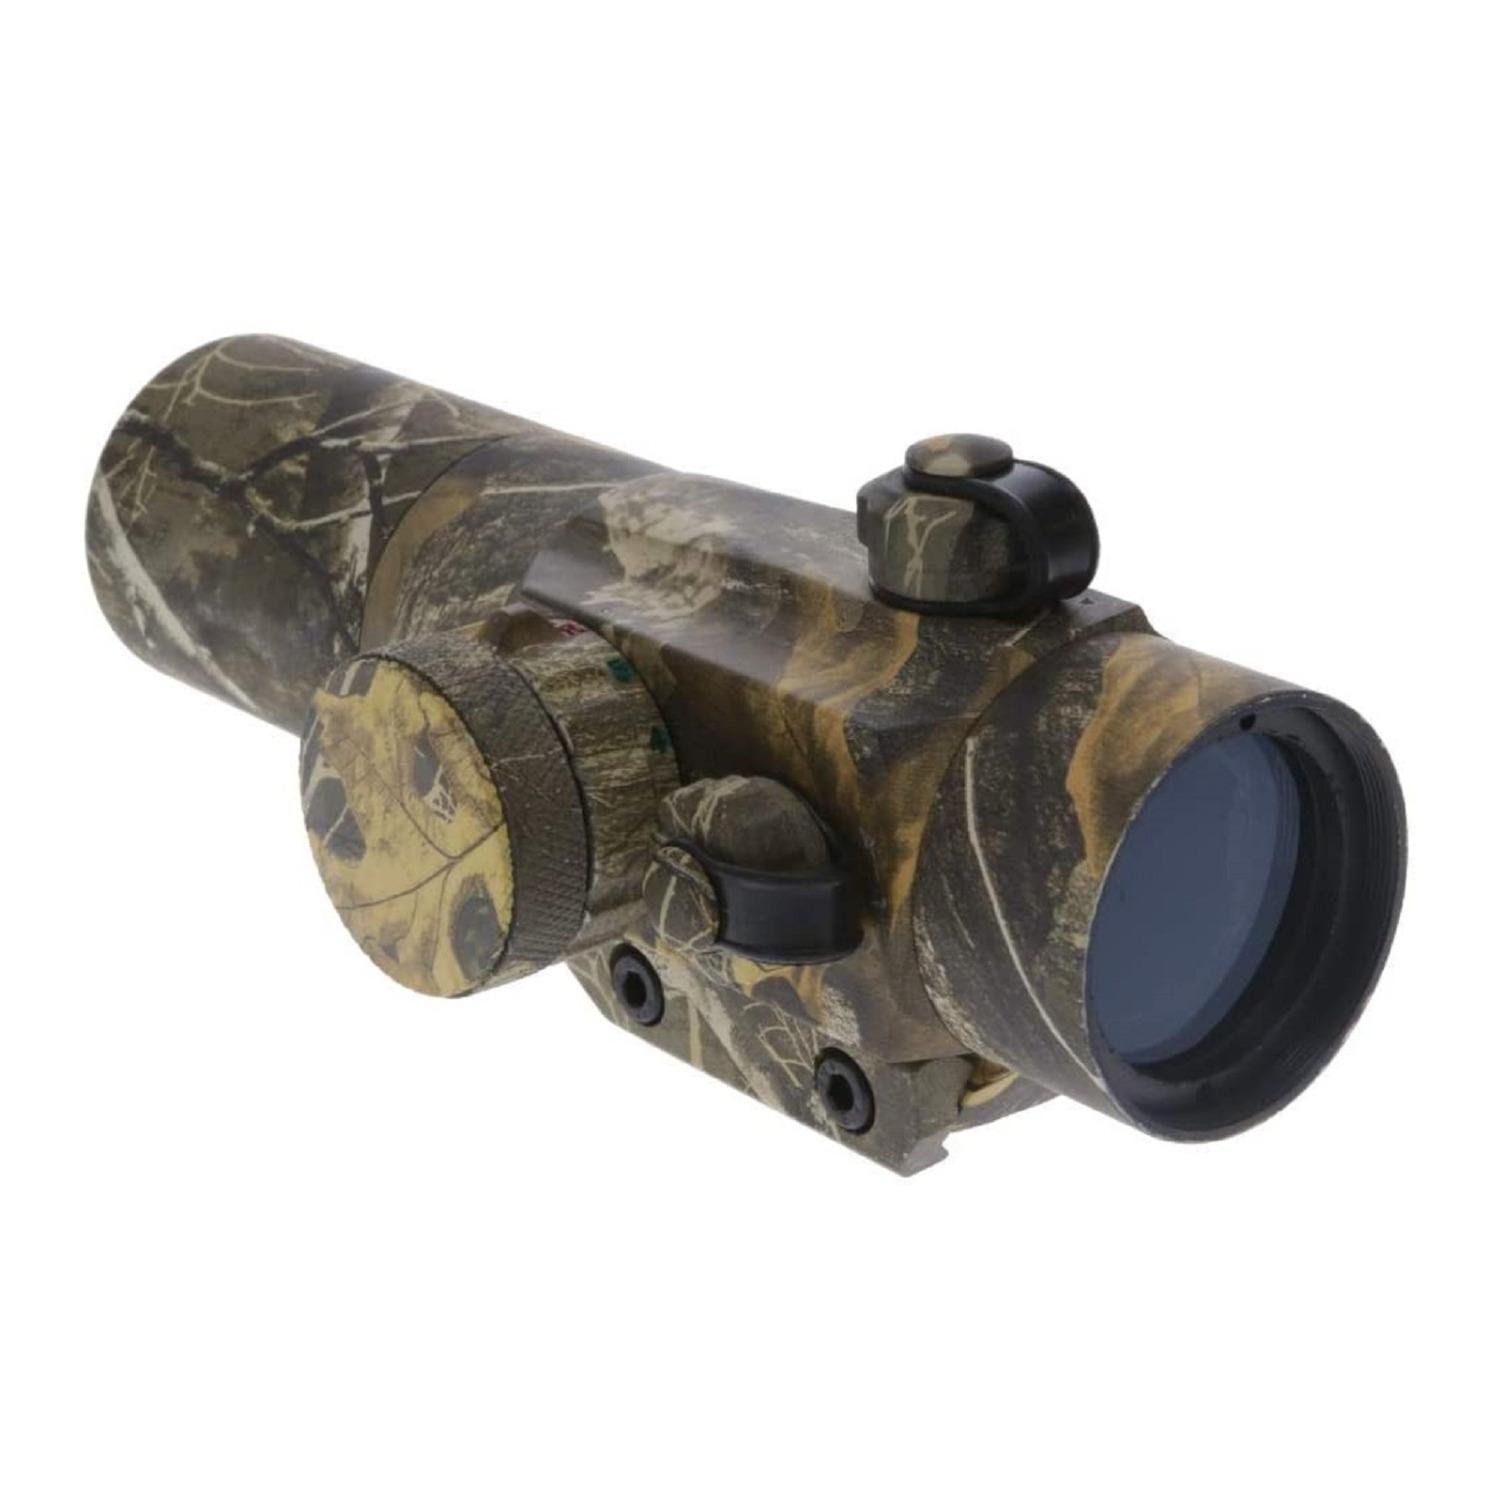 TruGlo TG8030GA Gobble-Stopper 30mm Turkey Hunting Dual-Color Dot Sight - $64.98 w/code "TRUGLO20" (Free S/H)